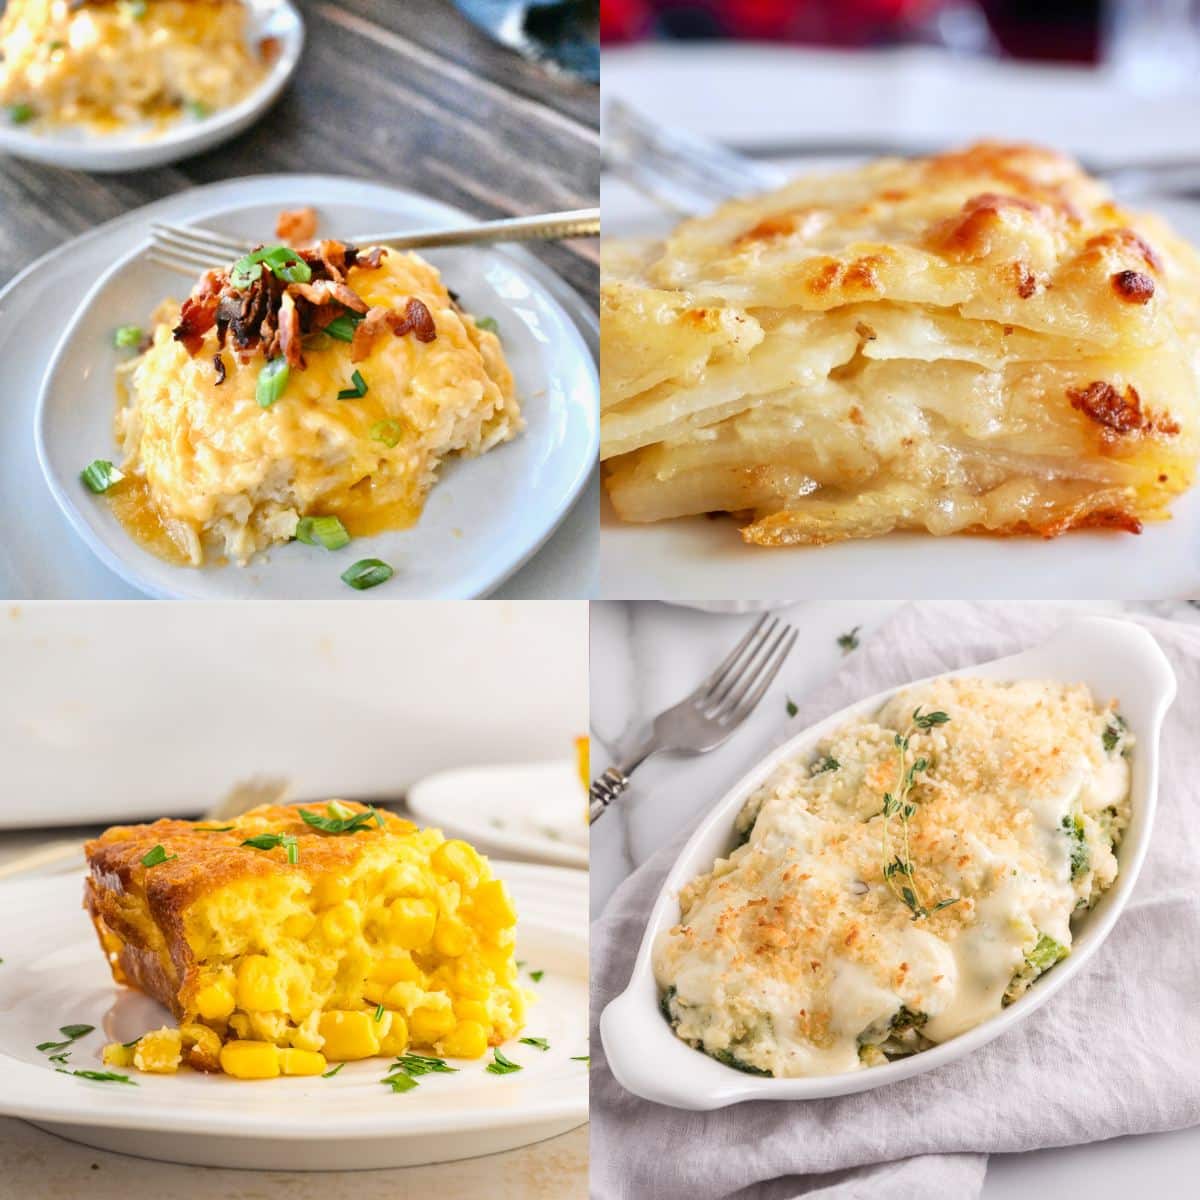 Hashbrown casserole, potatoes au gratin, corn pudding and broccoli gratin best sides for Thanksgiving and Christmas meals.